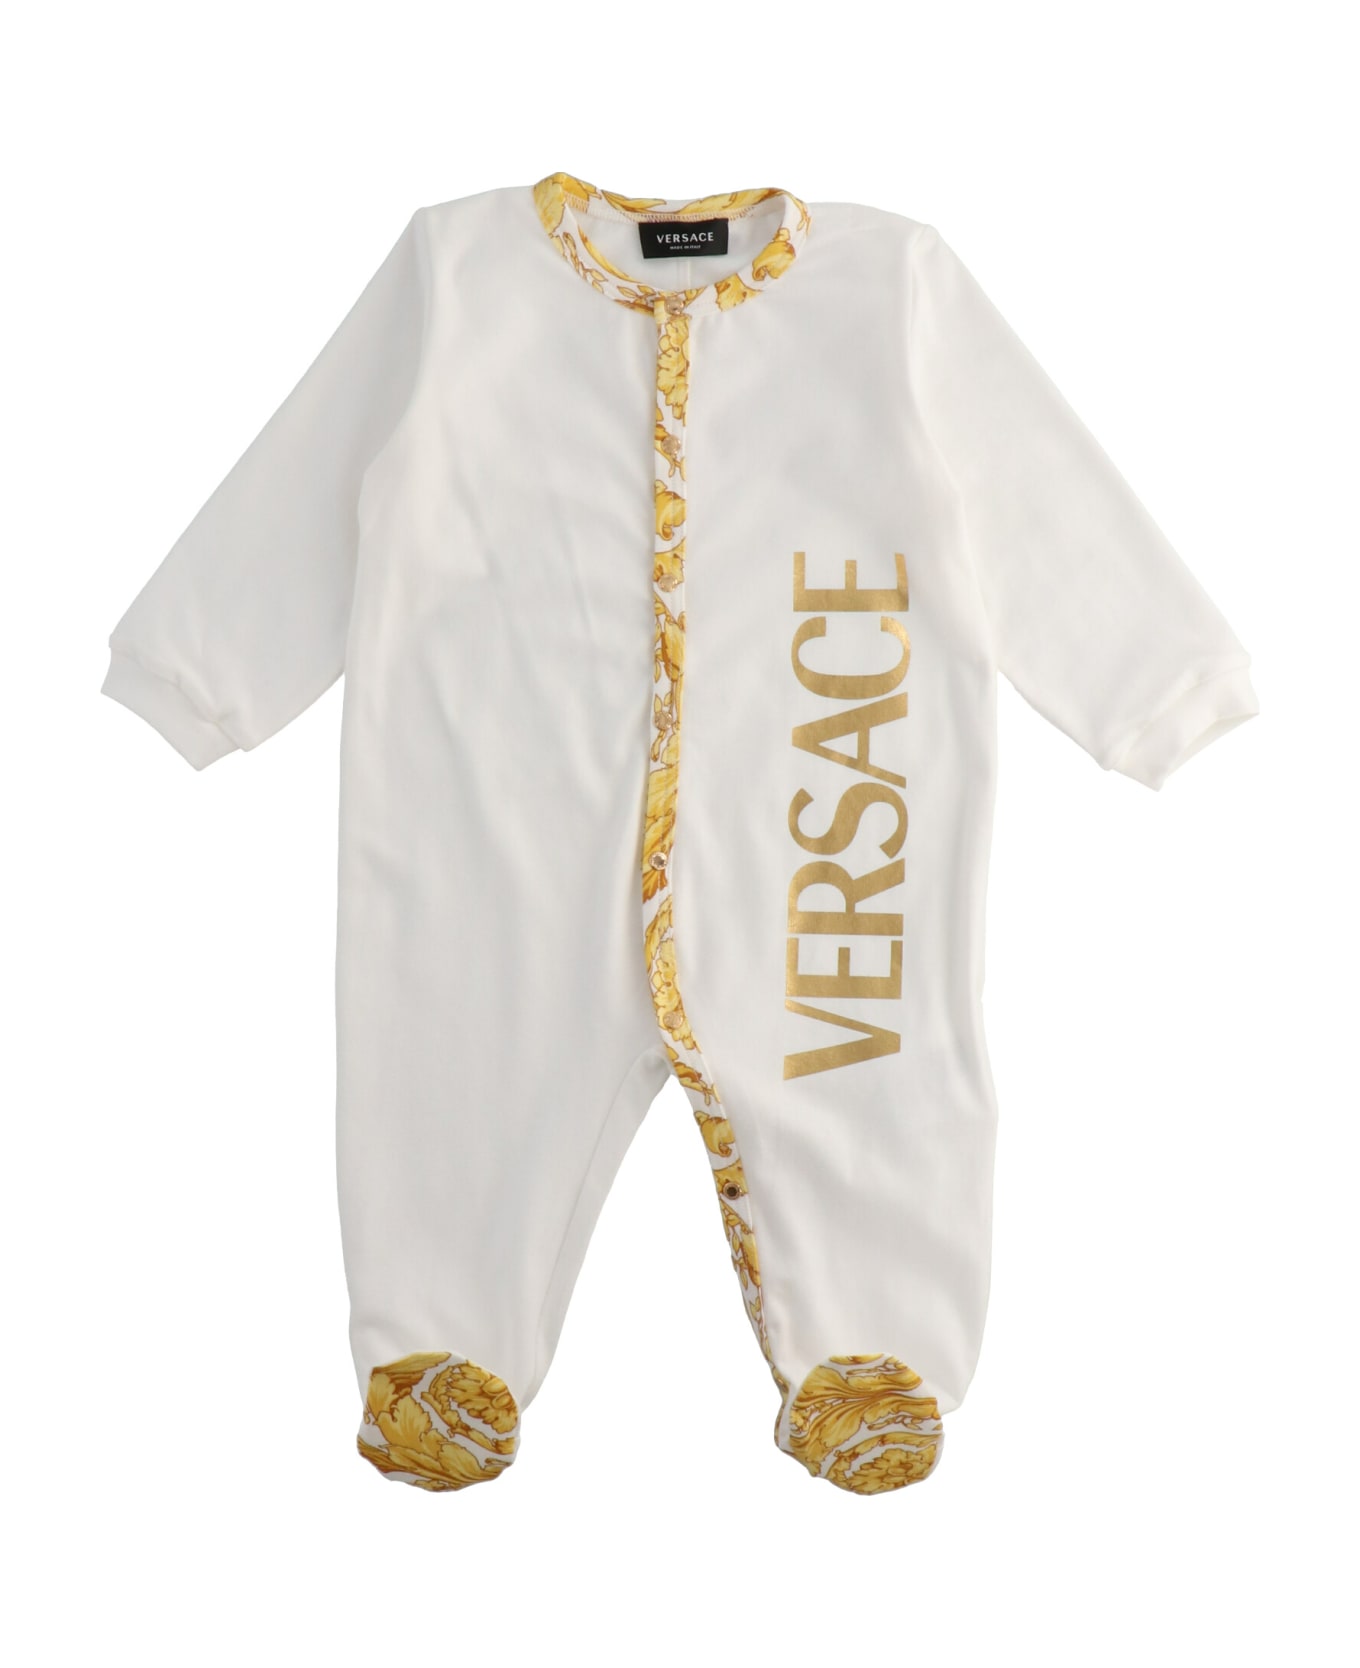 Versace 'barocco' Rompersuit - White